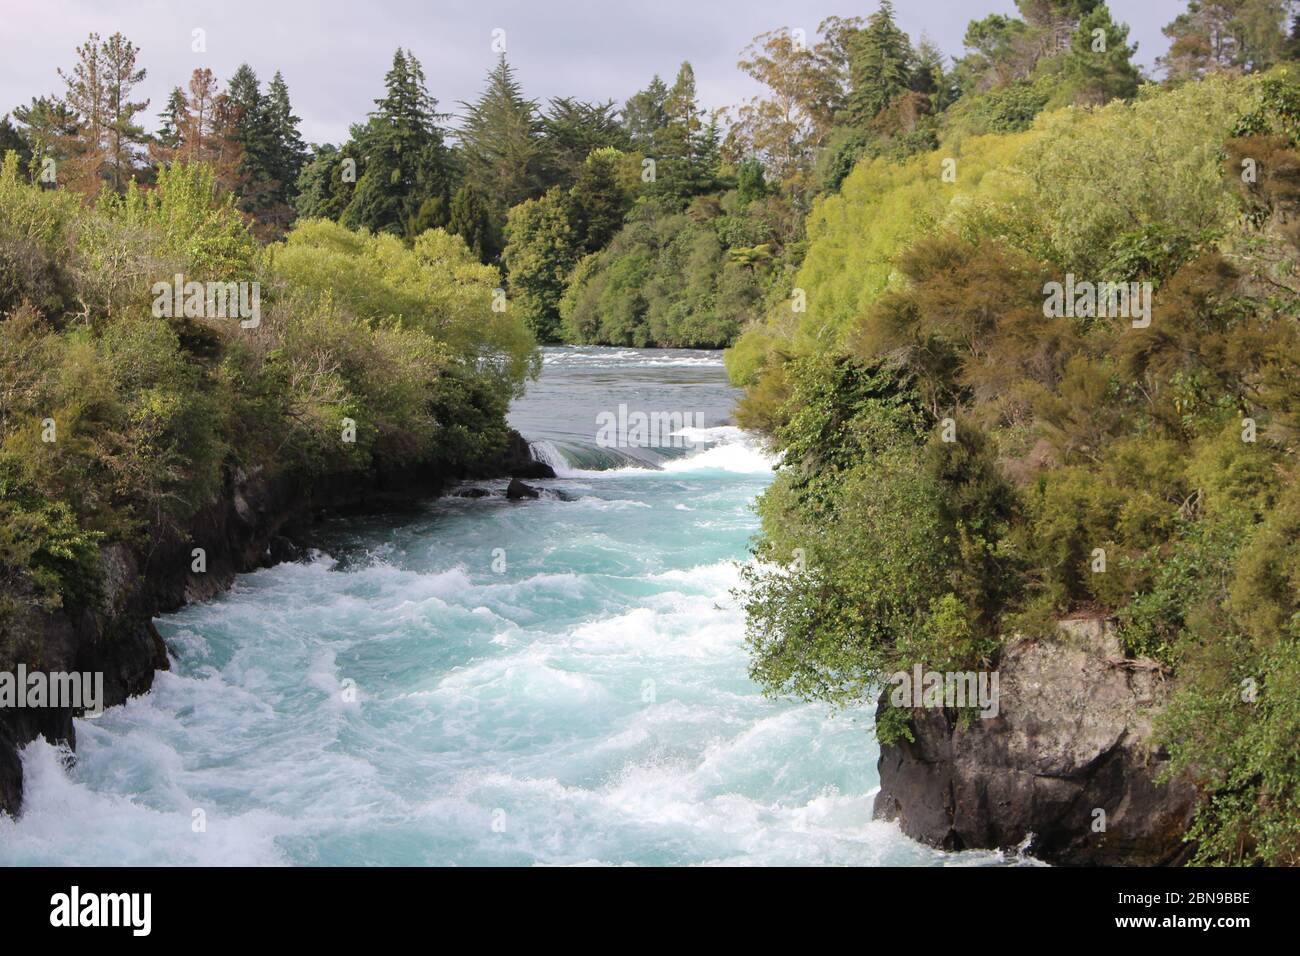 Stunning Huka Falls of Waikato River in Taupo District in Waikato Region on the North Island in New Zealand. The massive, powerfull waterfall is surro Stock Photo